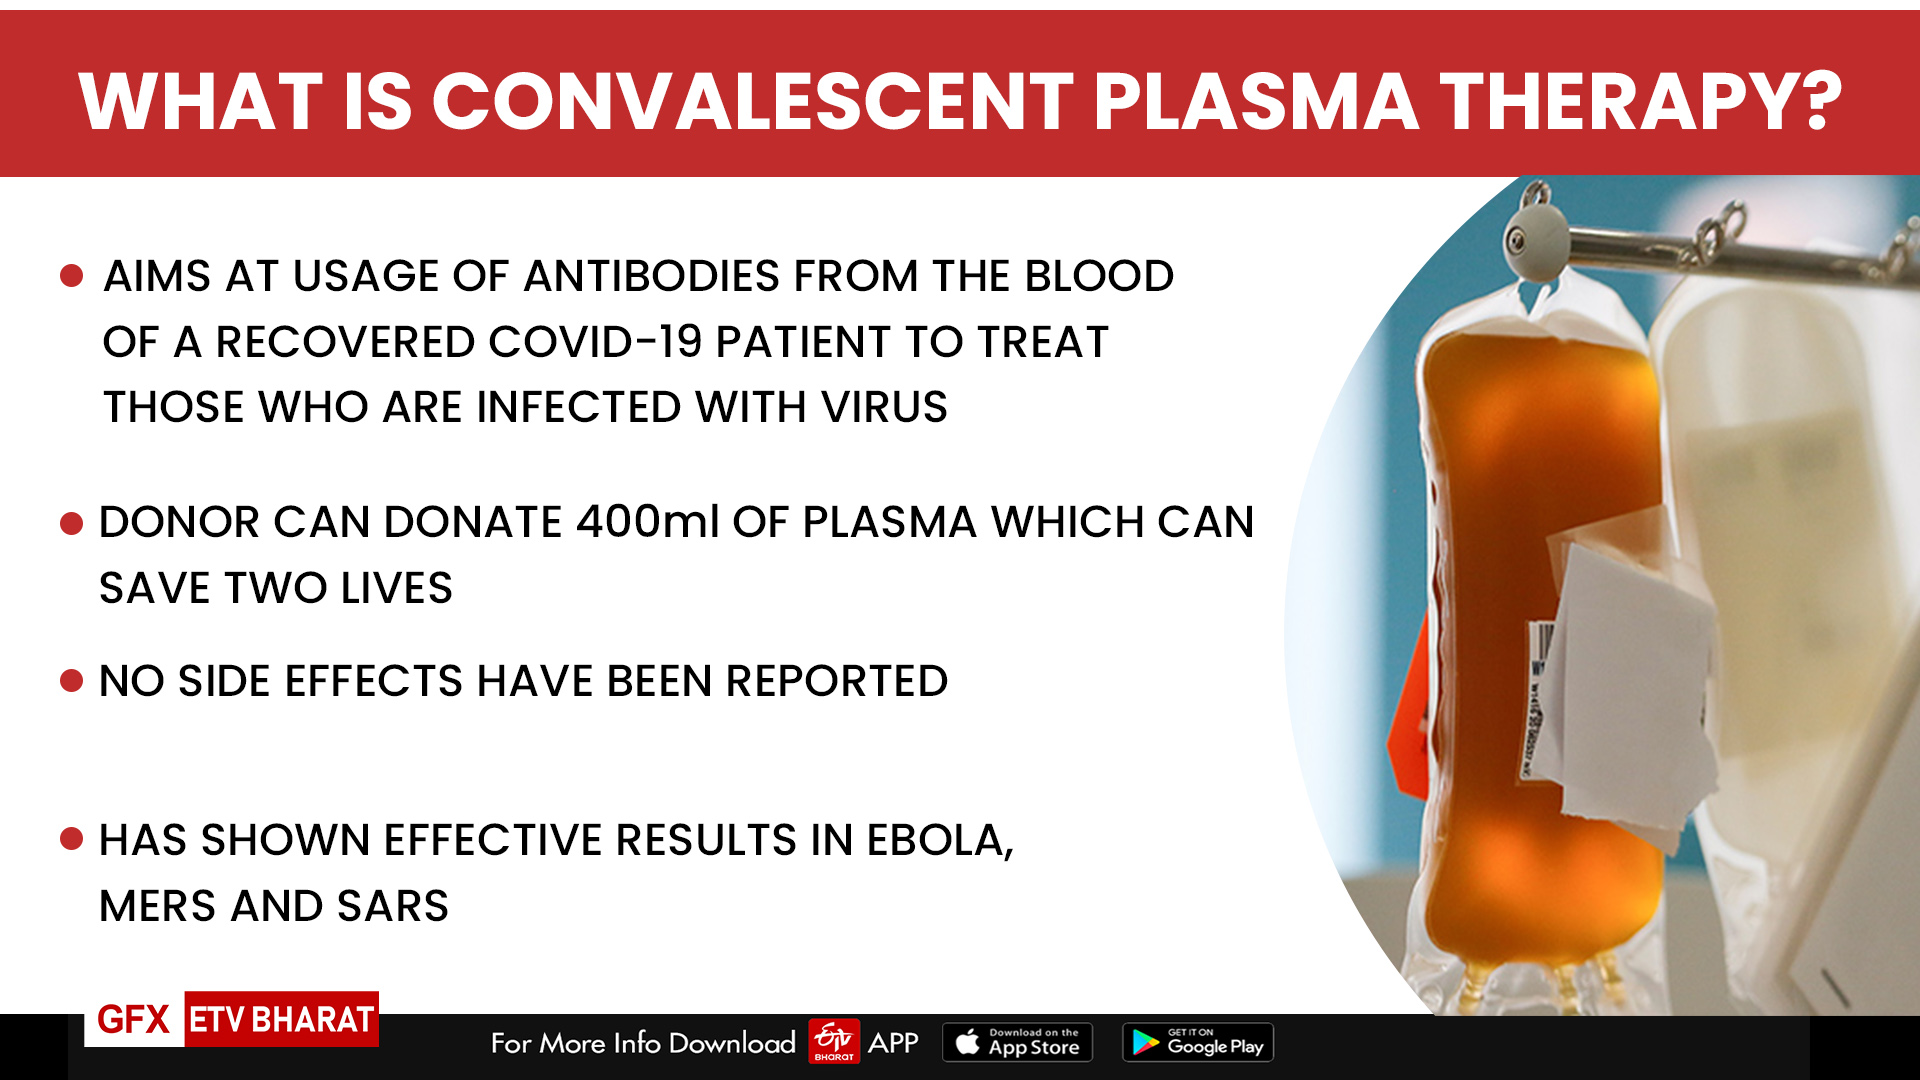 WHAT IS CONVALESCENT PLASMA THERAPY?